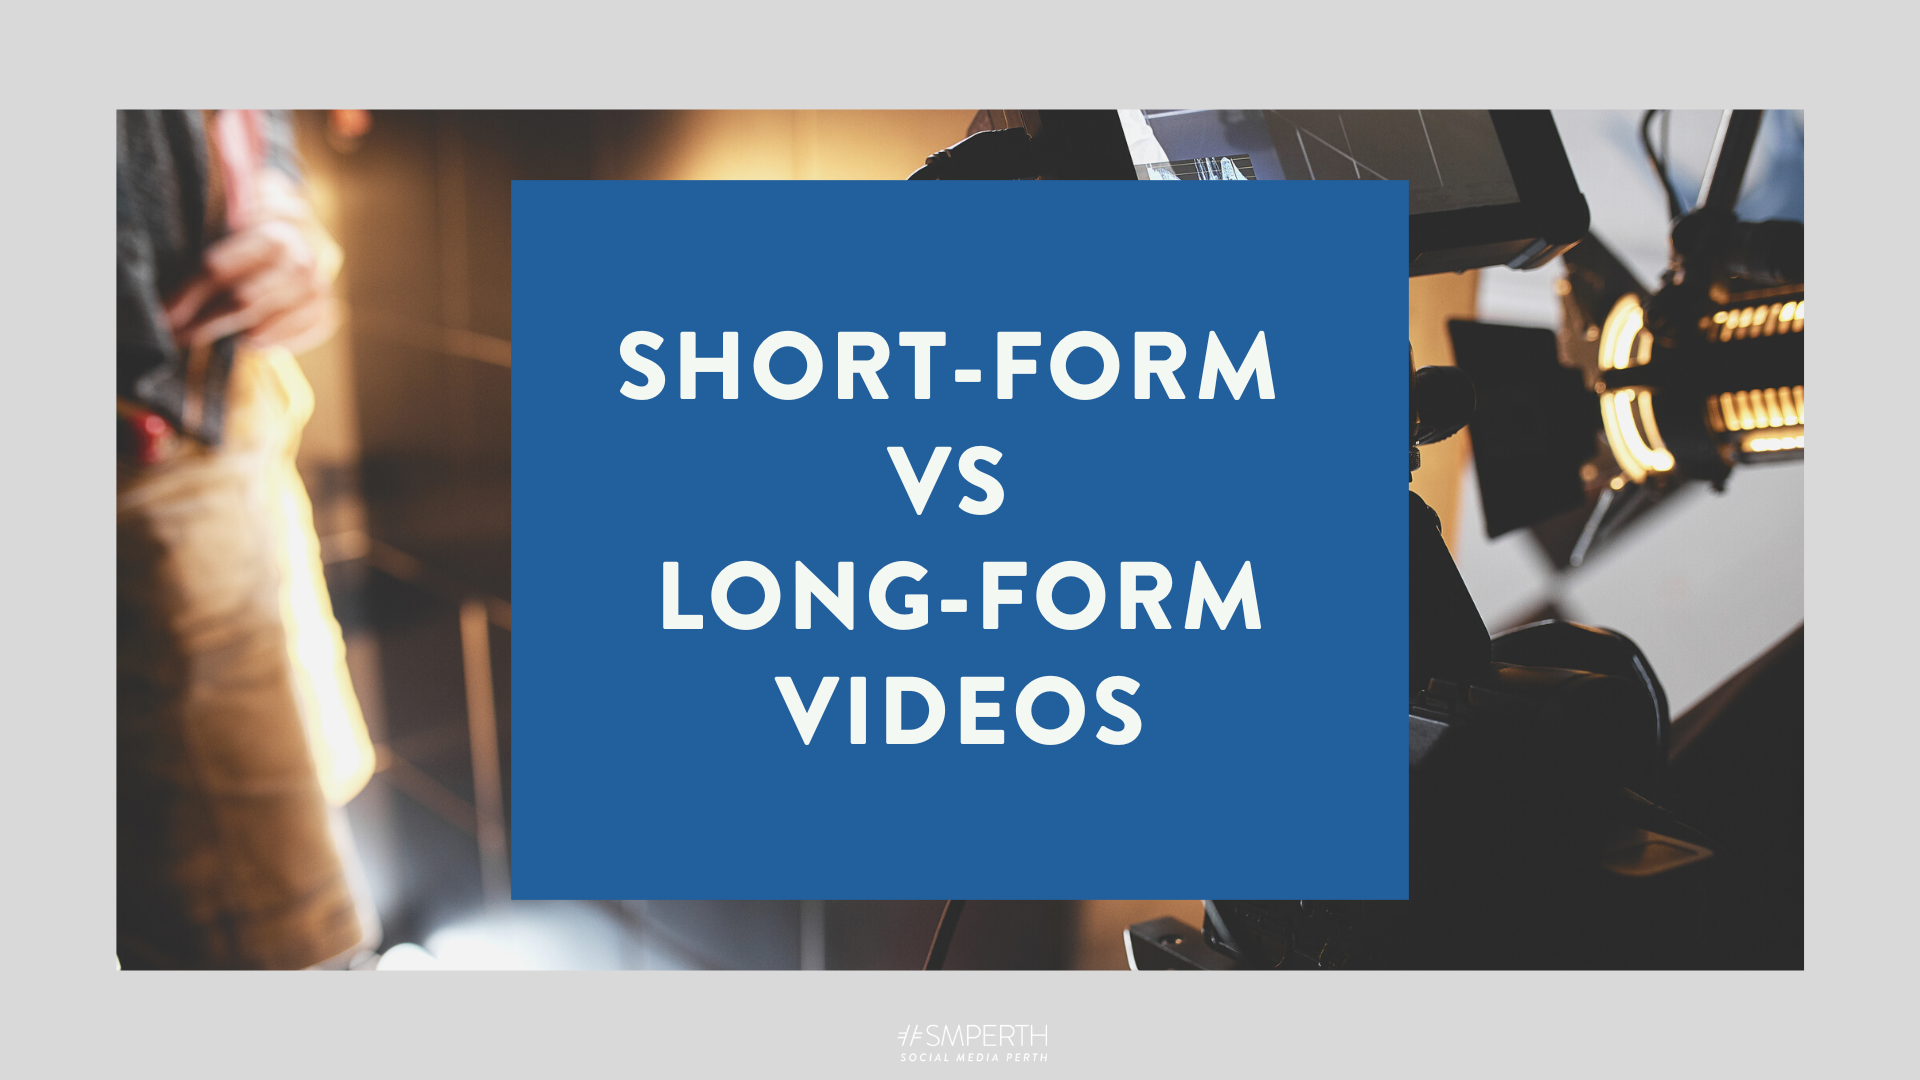  Long form content vs. Shorts. Which is best? - Falkon Digital